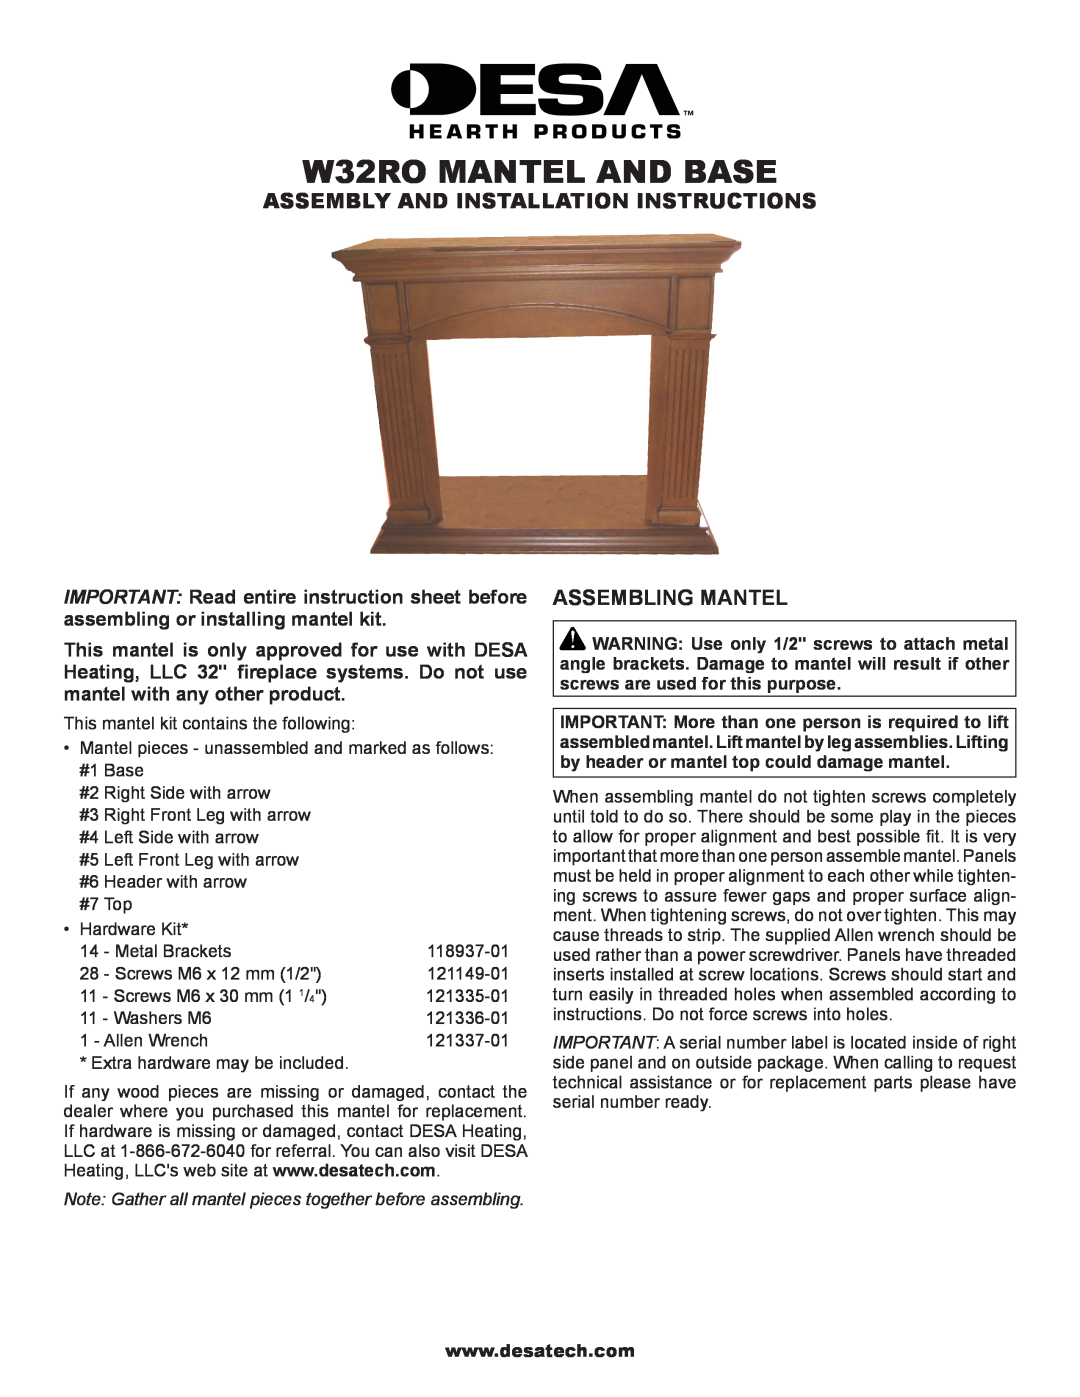 Desa installation instructions Assembly And Installation Instructions, Assembling Mantel, W32RO Mantel and Base 